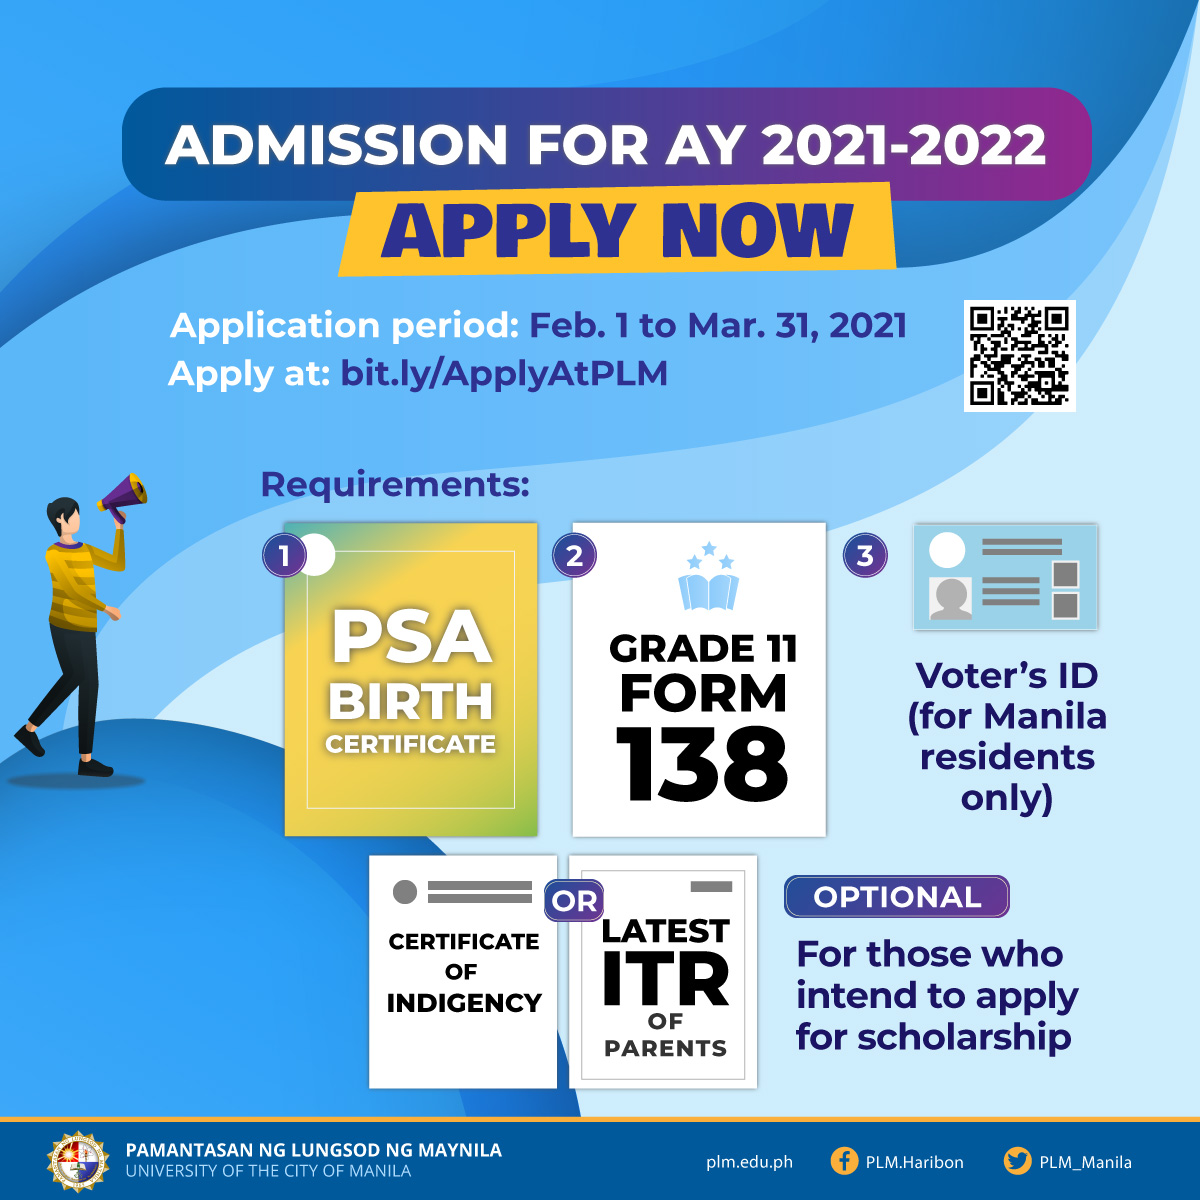 PLM freshmen application for AY 2021-2022 opens today